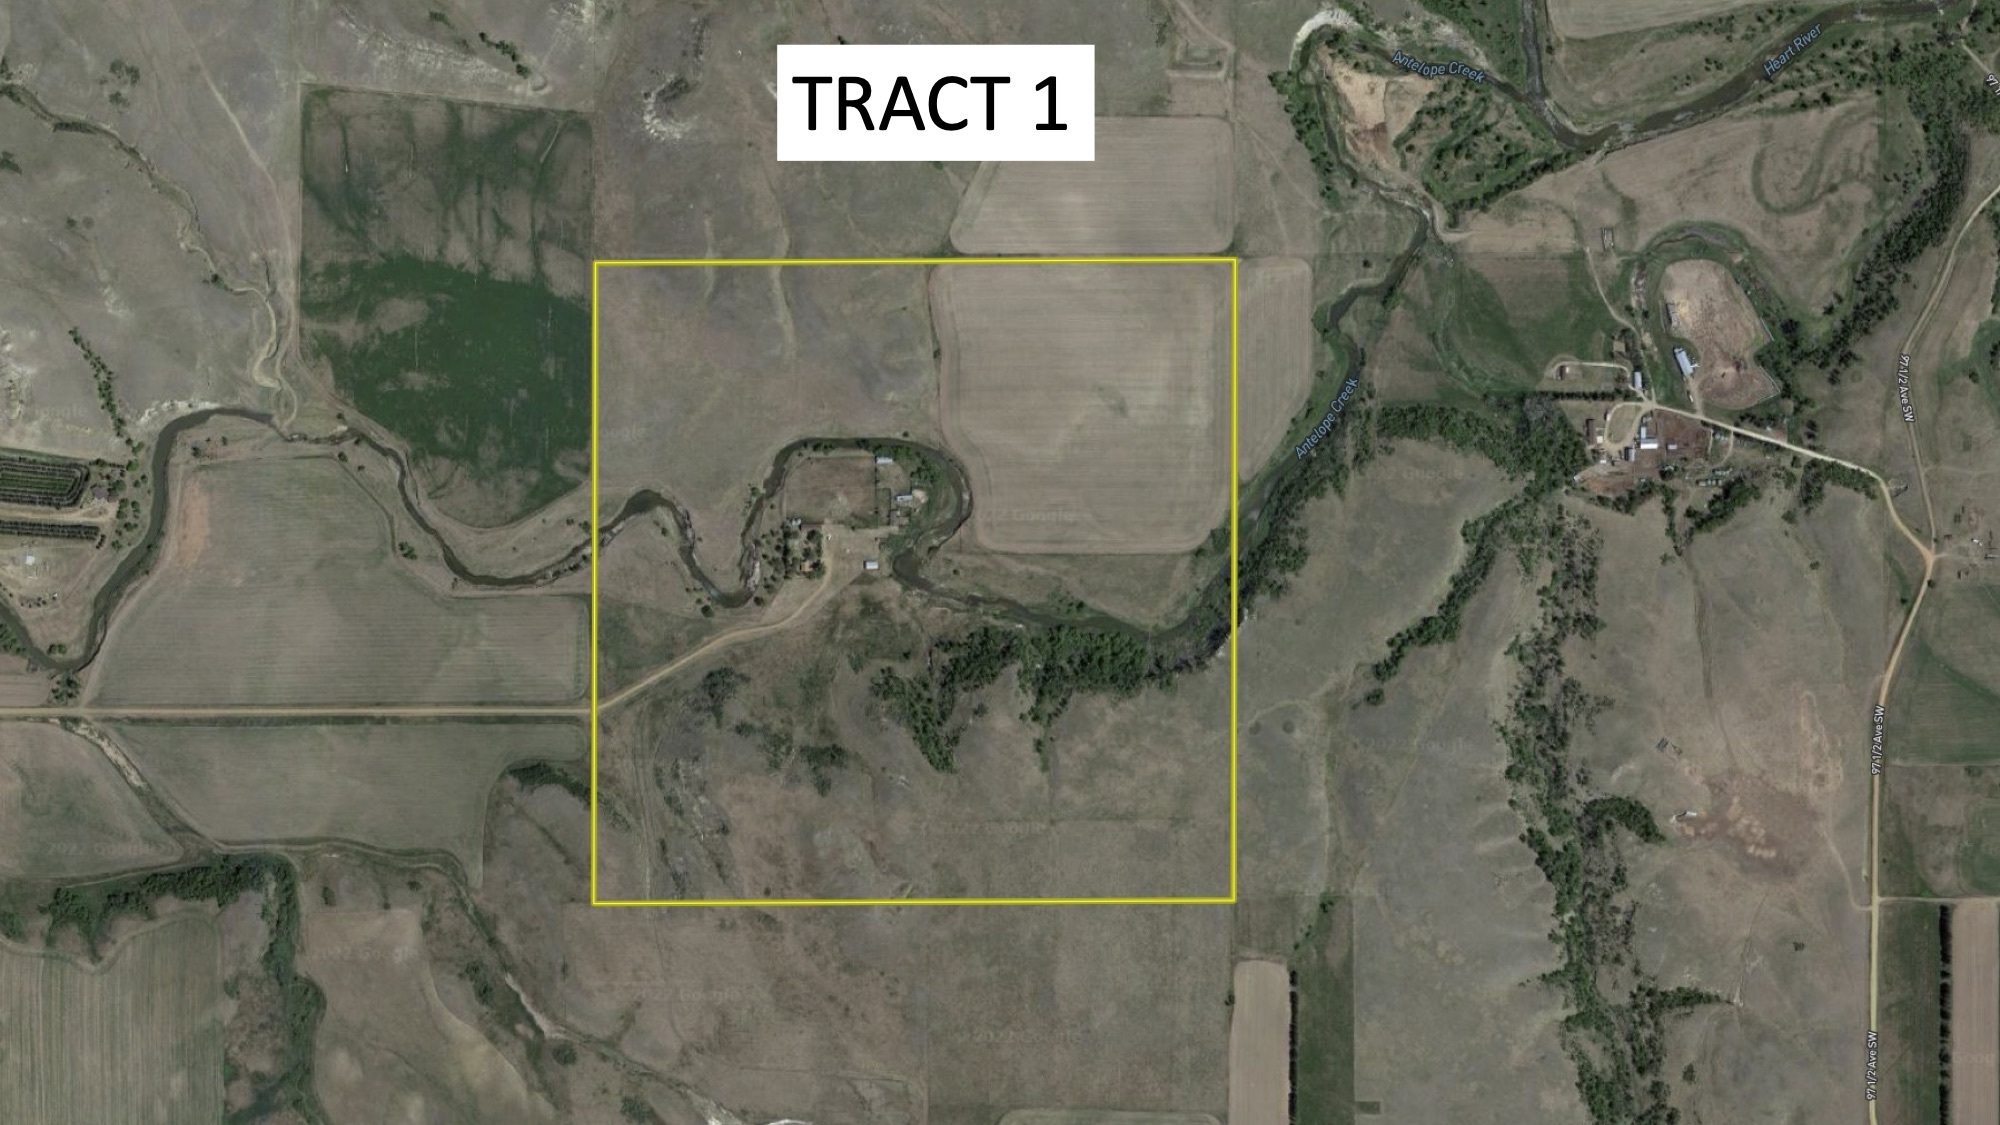 TRACT 1 AERIAL